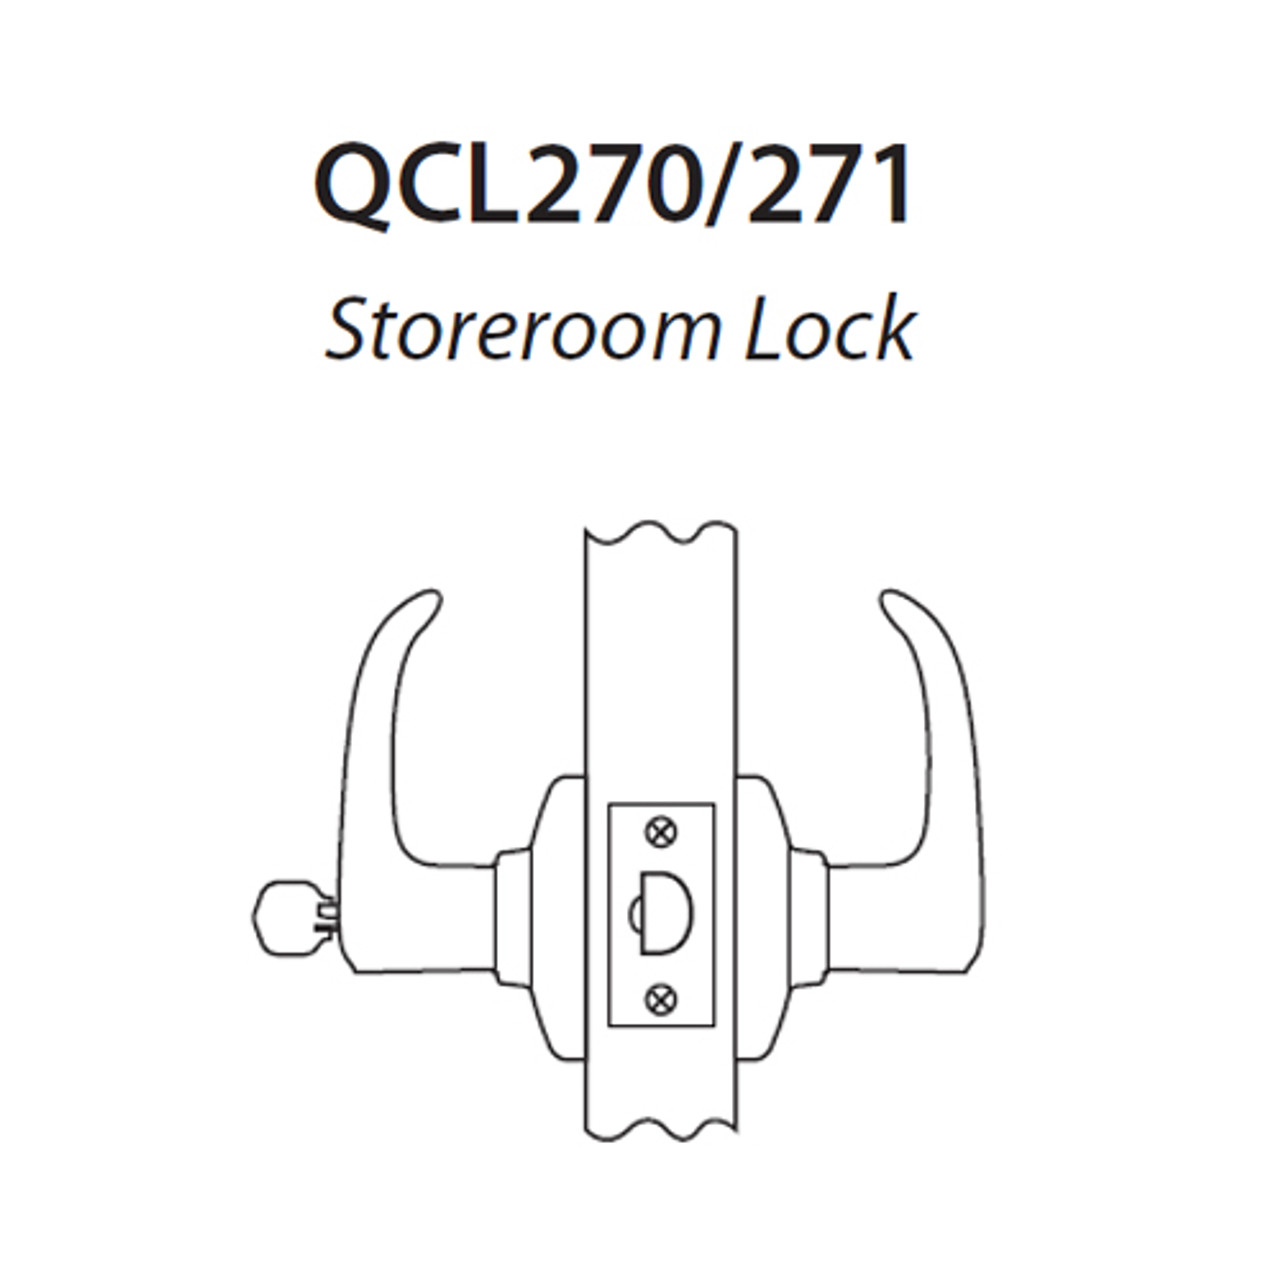 QCL271E626NR4FLSBF Stanley QCL200 Series Ansi Strike Best "F" Storeroom Lock with Sierra Lever Prepped with SFIC Core in Satin Chrome